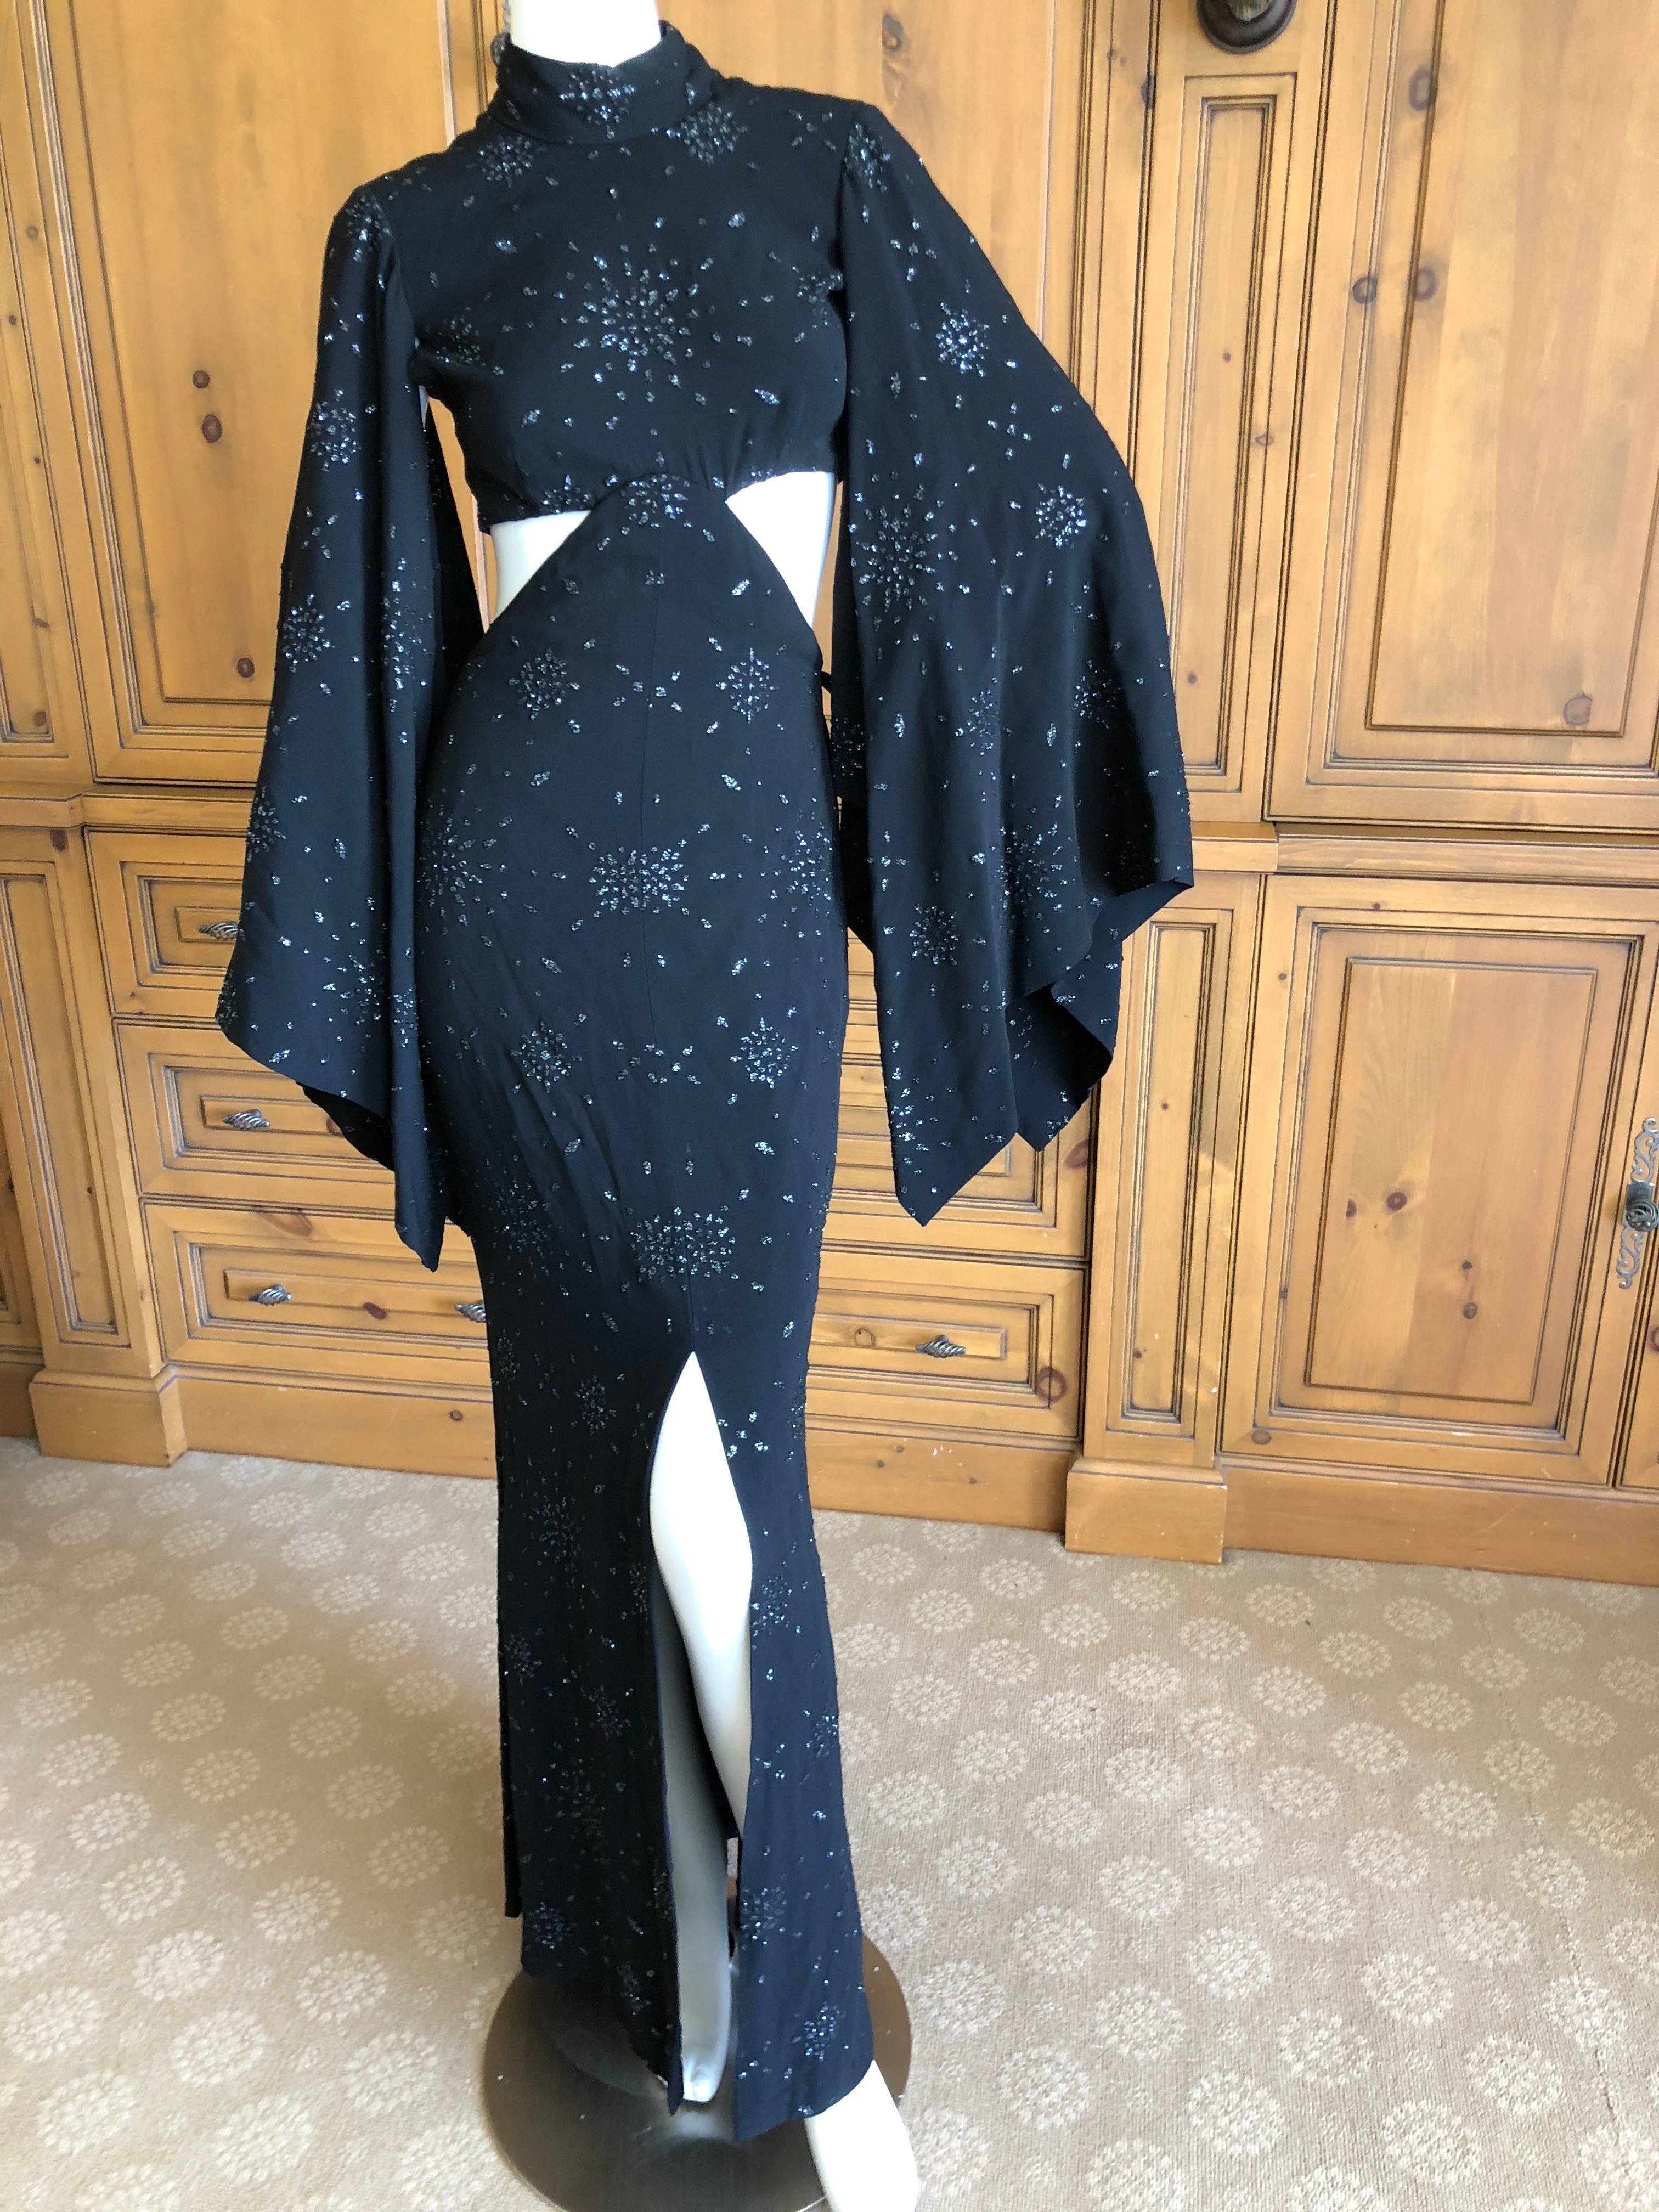 Cardinali 1970's Seductive Glittering Cut Out Evening Dress with Kimono Sleeves For Sale 3